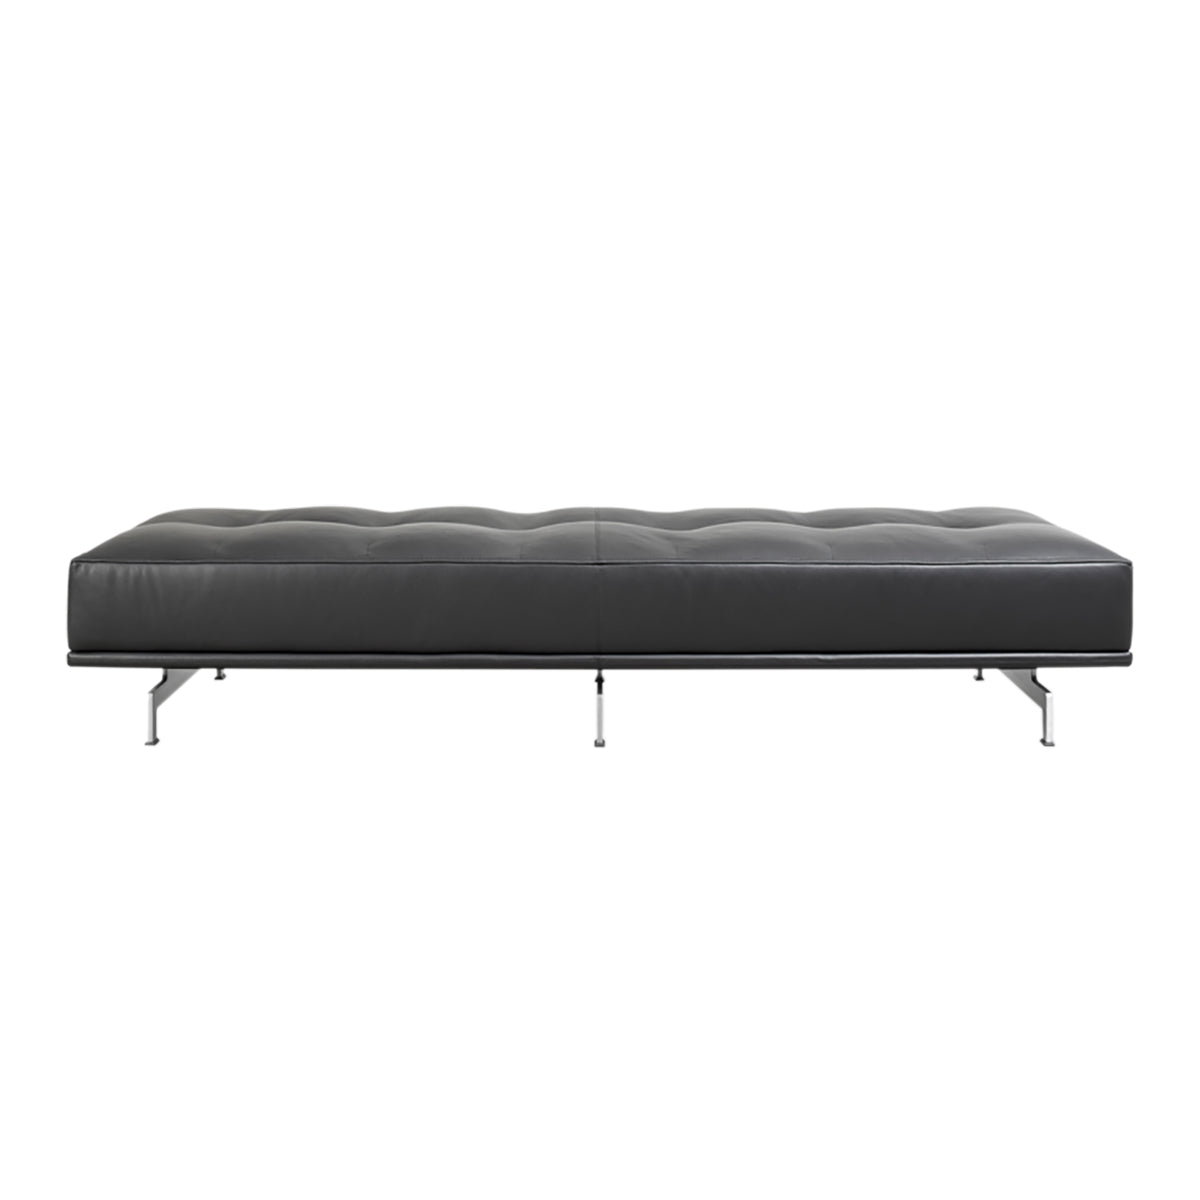 Delphi Daybed